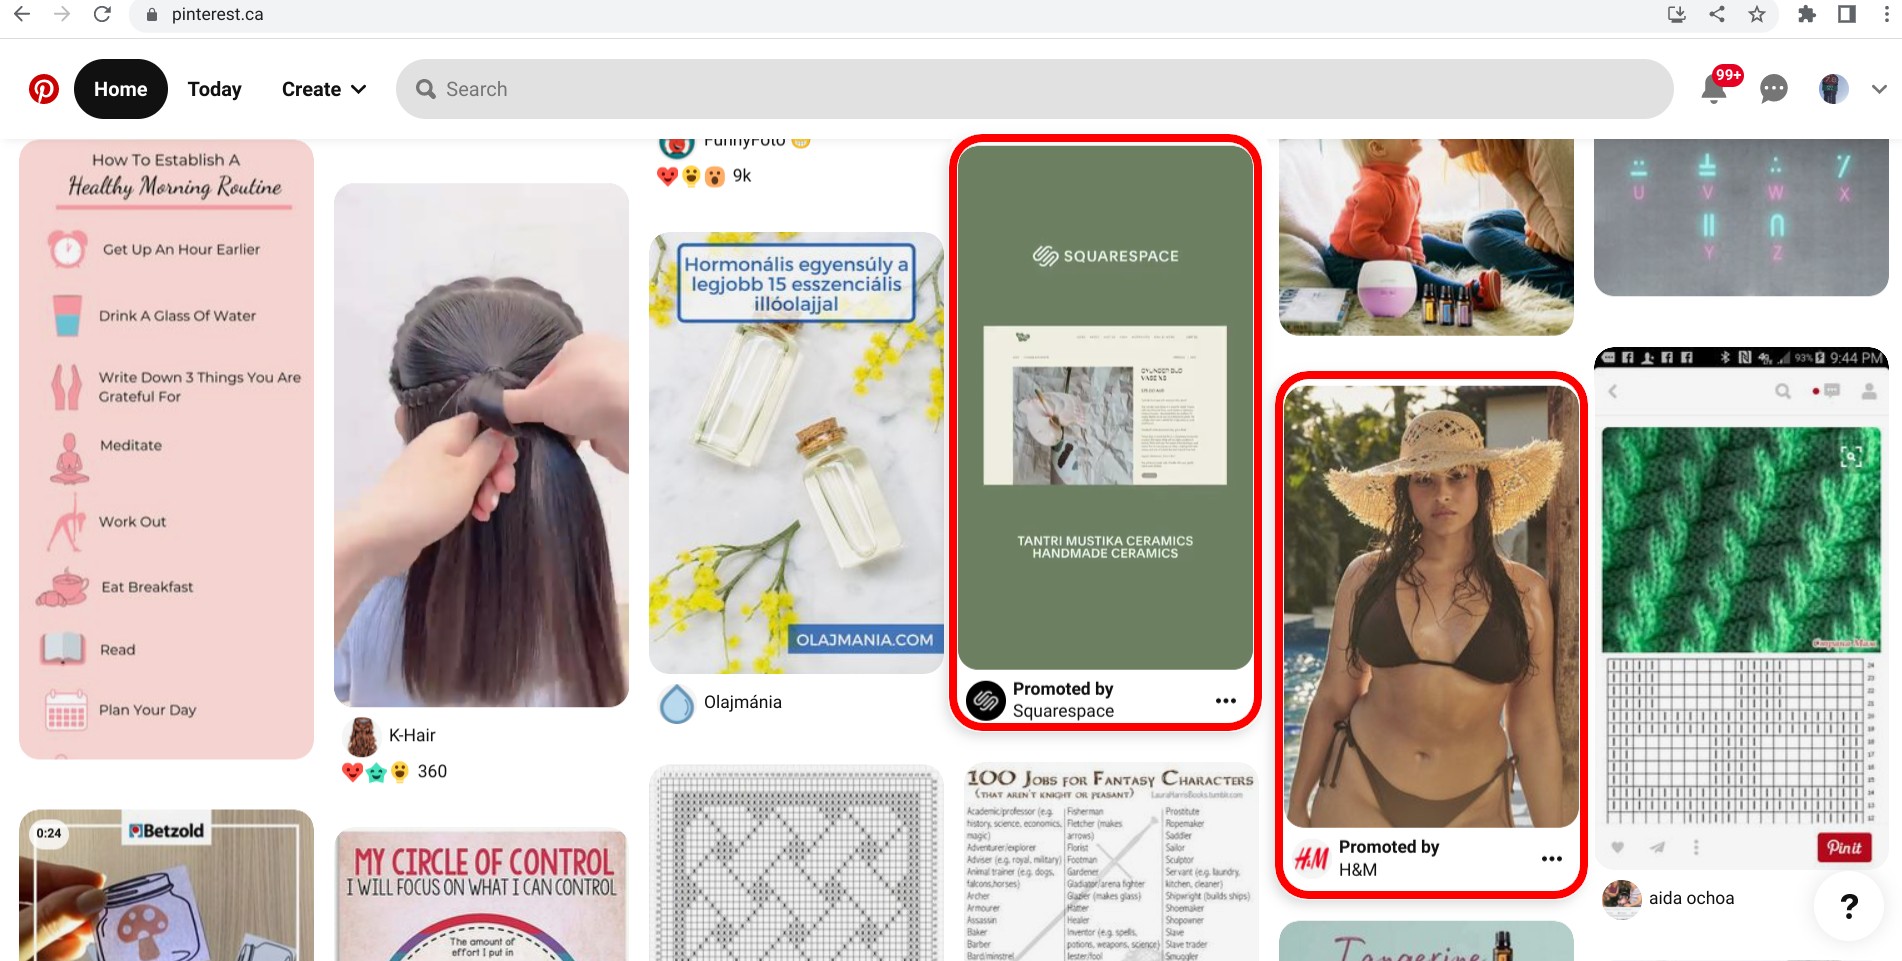 Screenshot of pinterest.ca displaying two ads as pins